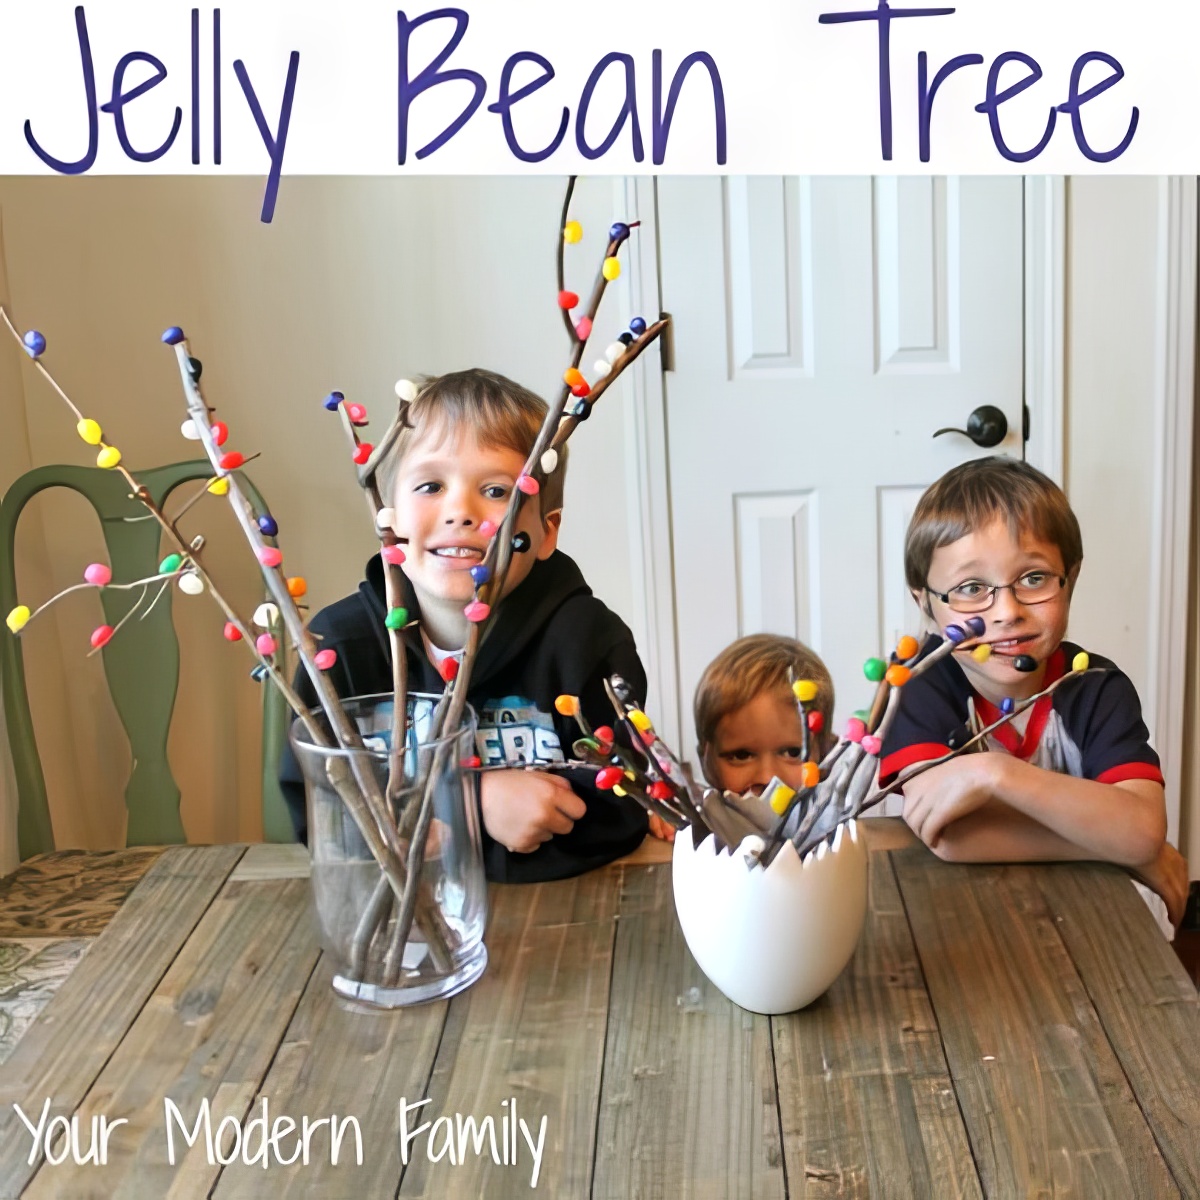 Jelly-Bean-Tree-easy-to-make for math preschoolers